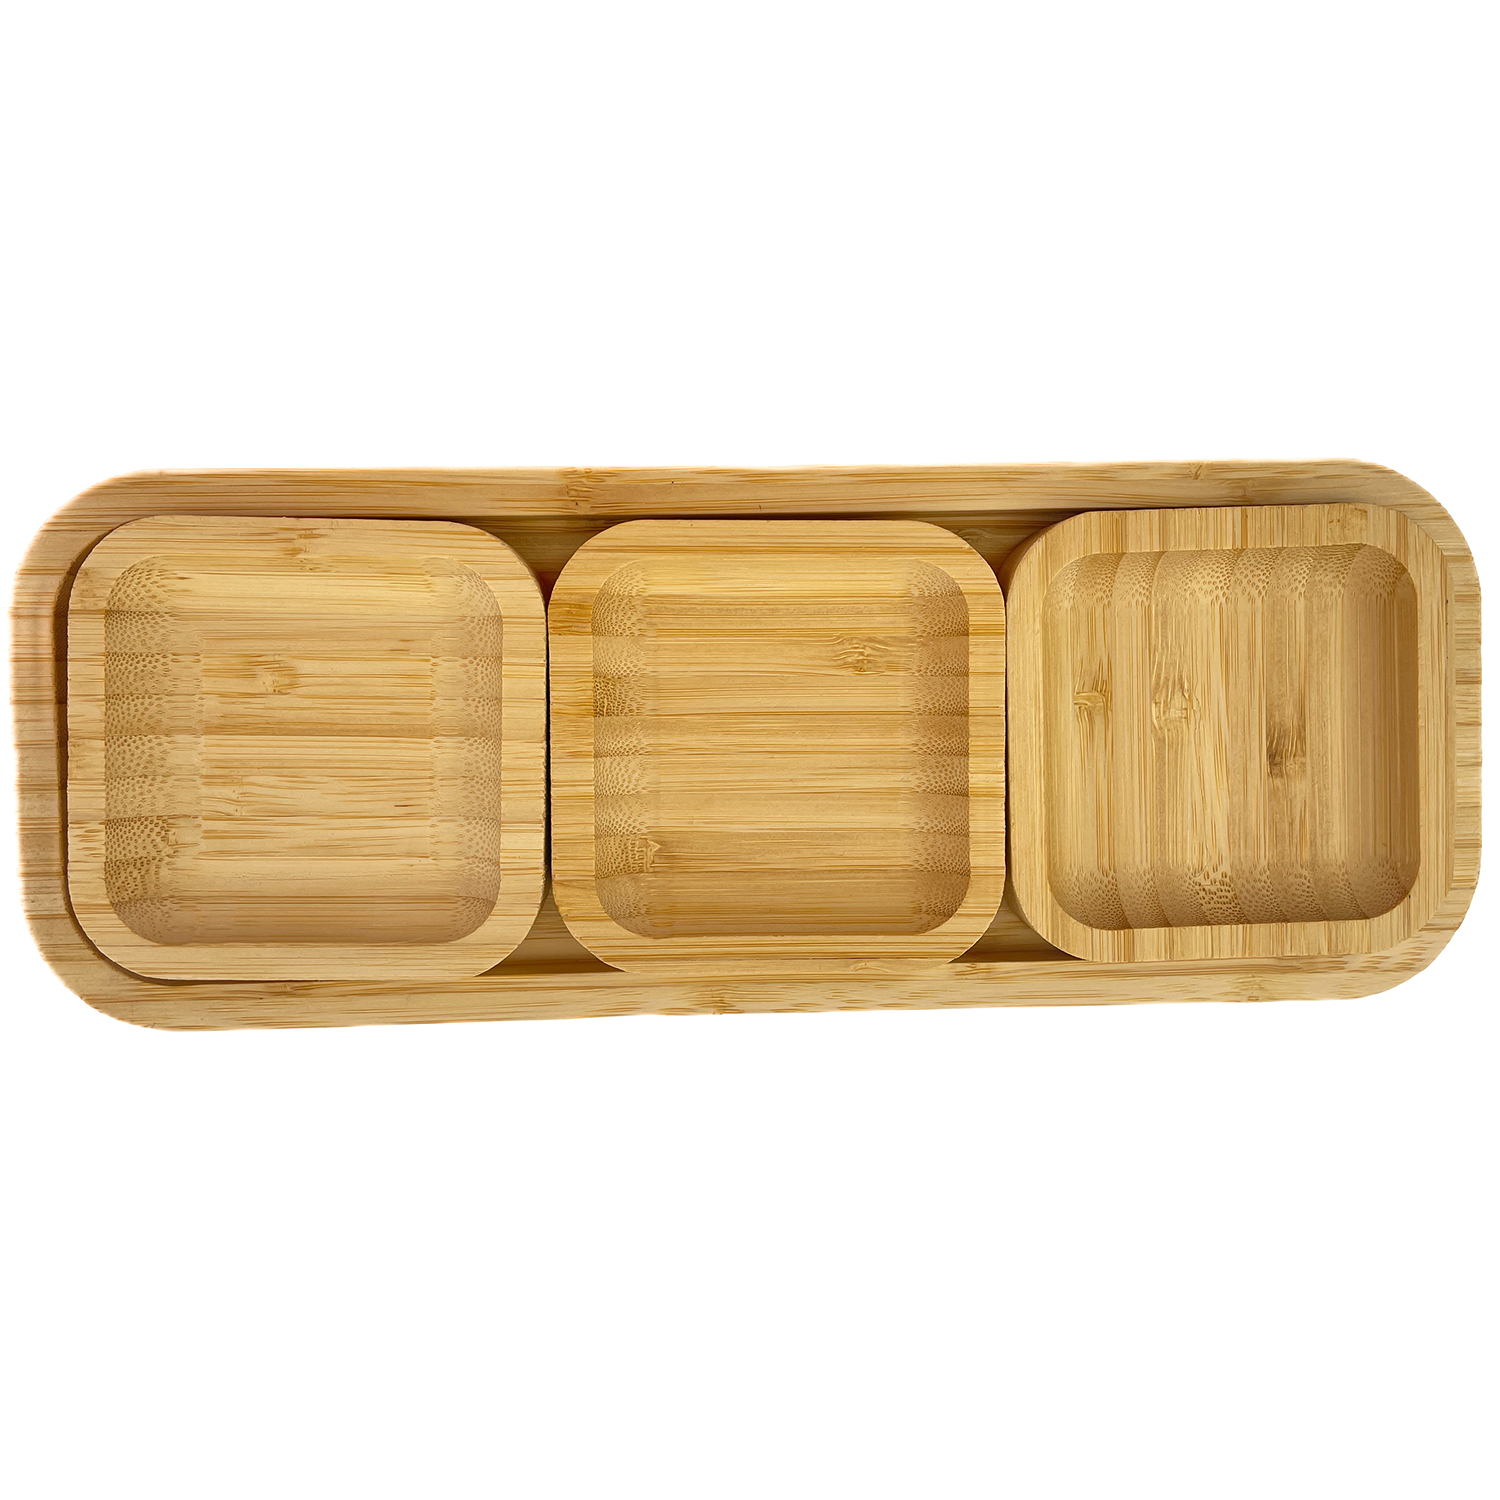 Bamboo Fruit Nuts Tray Dish Square Snack Plate Grid Bamboo Wood Dried Fruit Tray Household Snack Nut Sauce Fruit Box Dish Platter